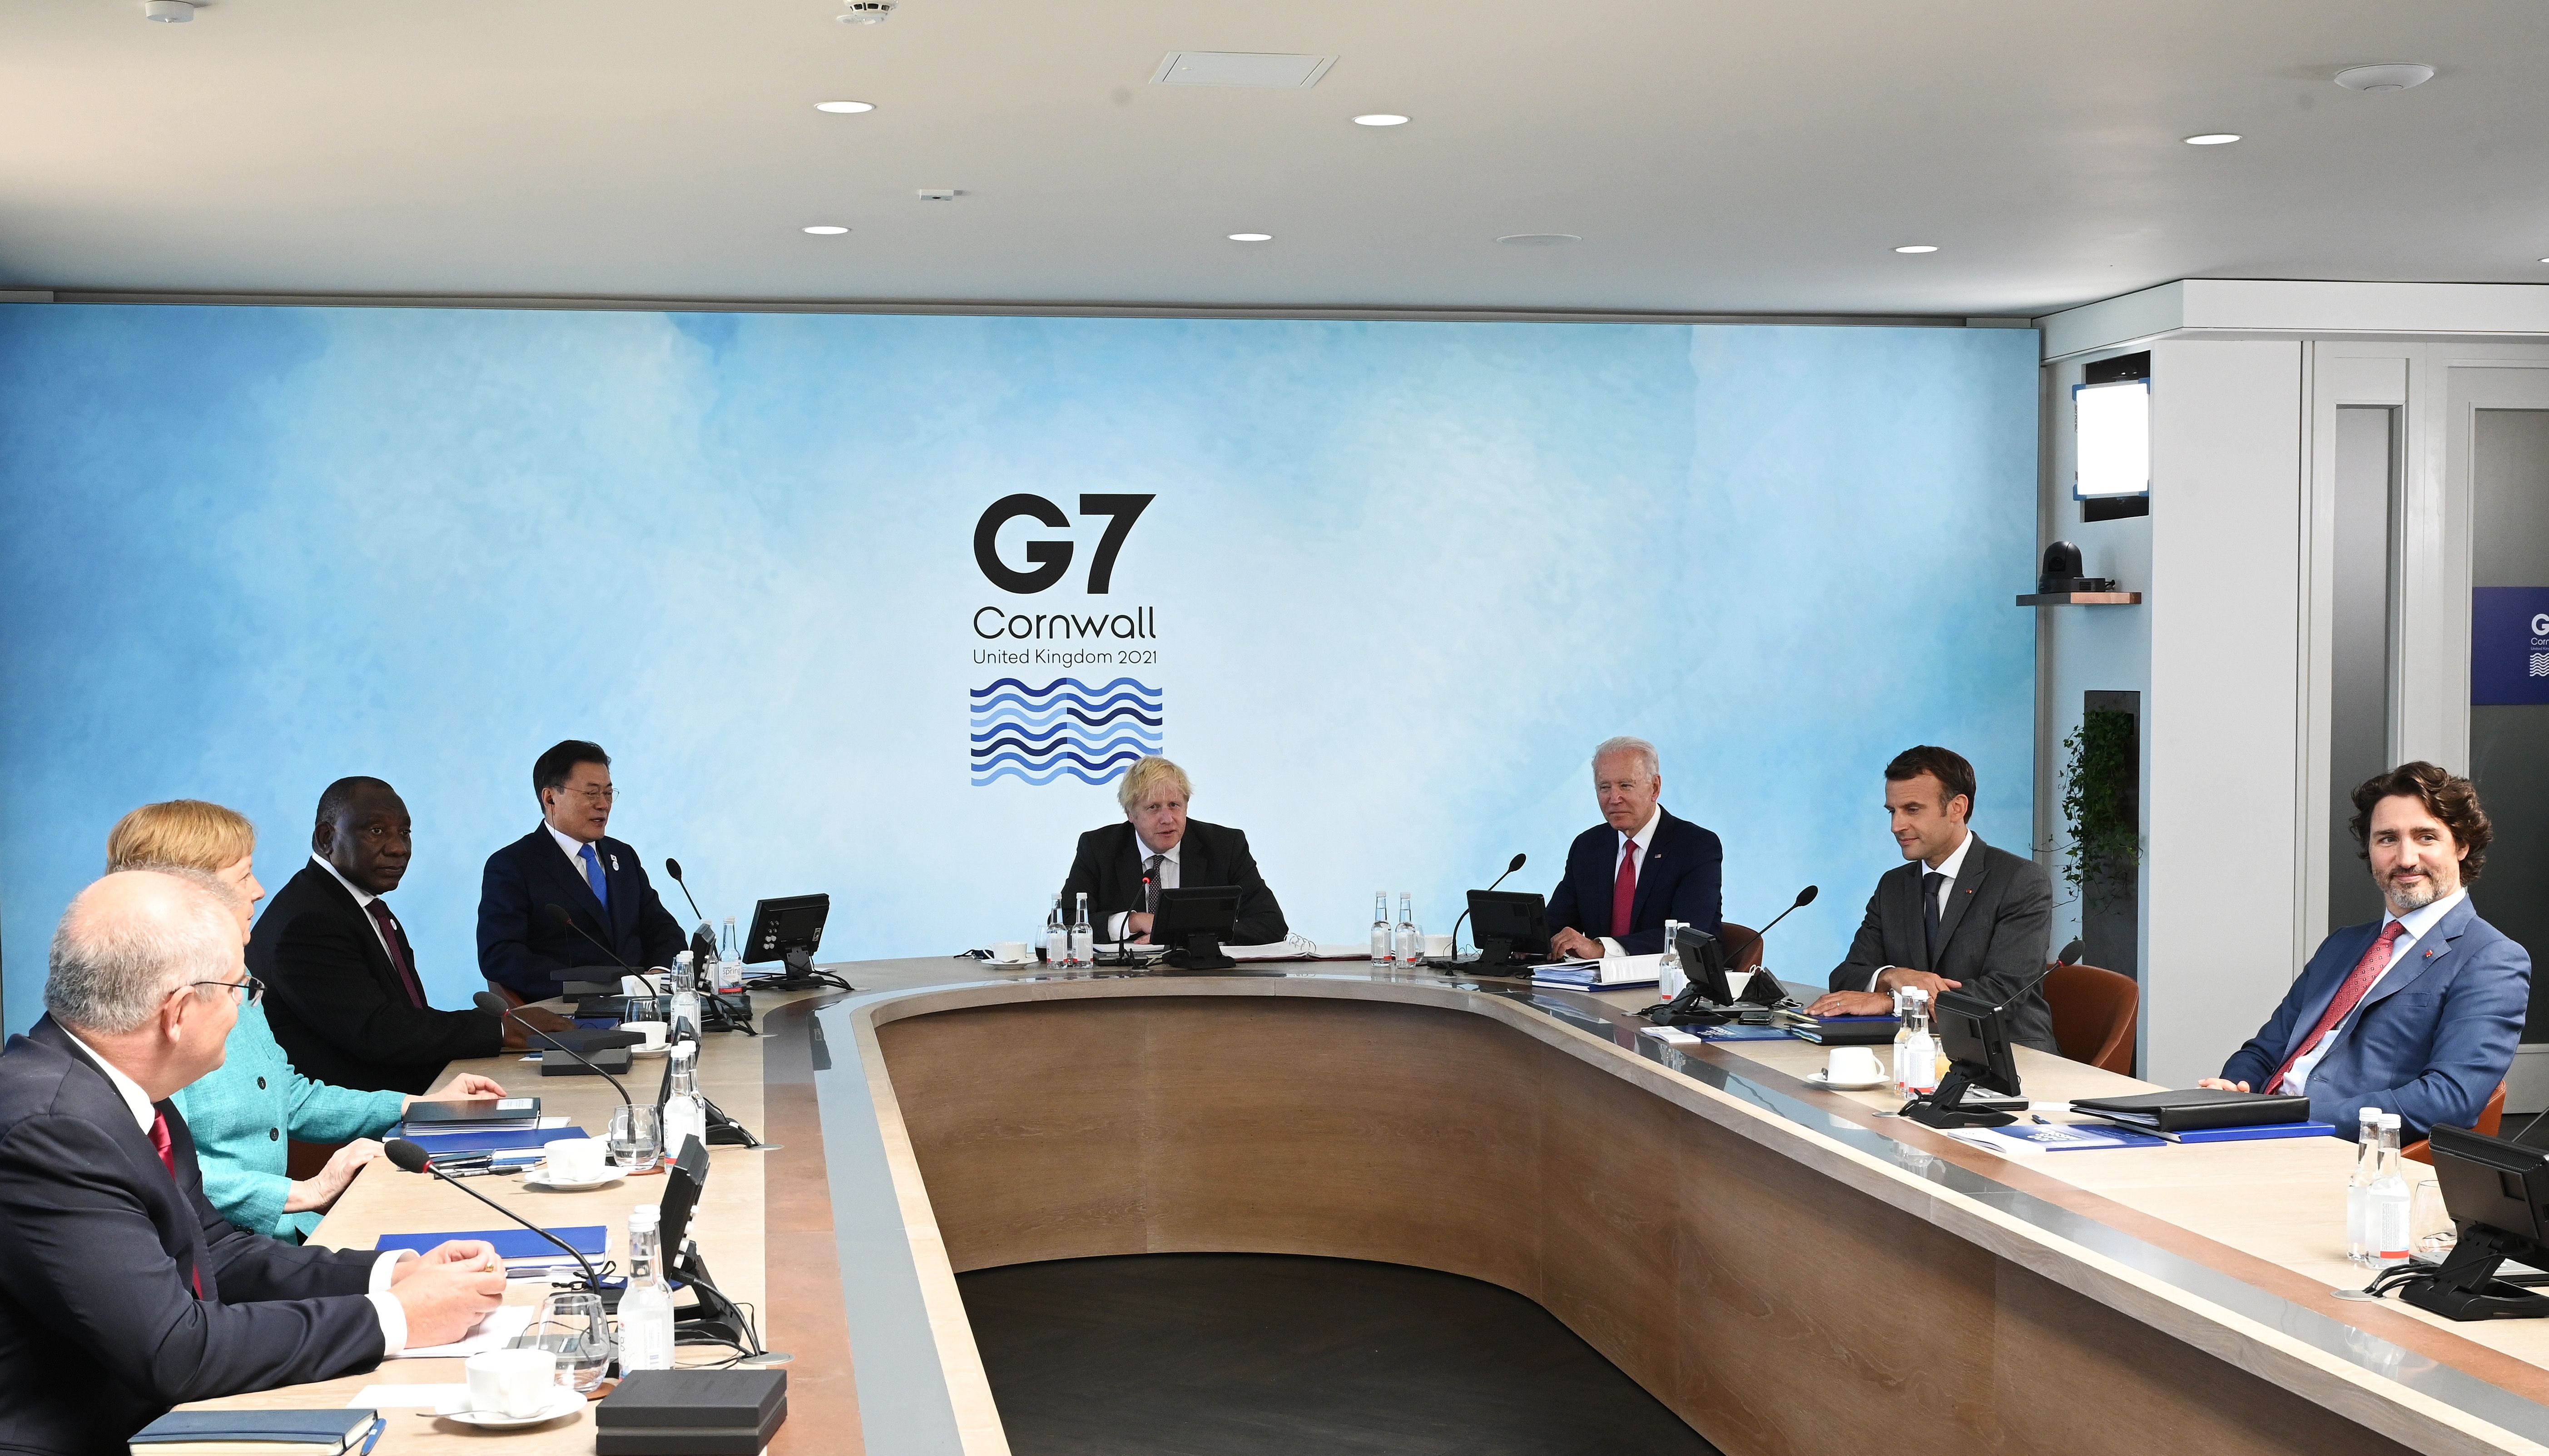 The G7 summit has taken place in Carbis Bay, Cornwall.